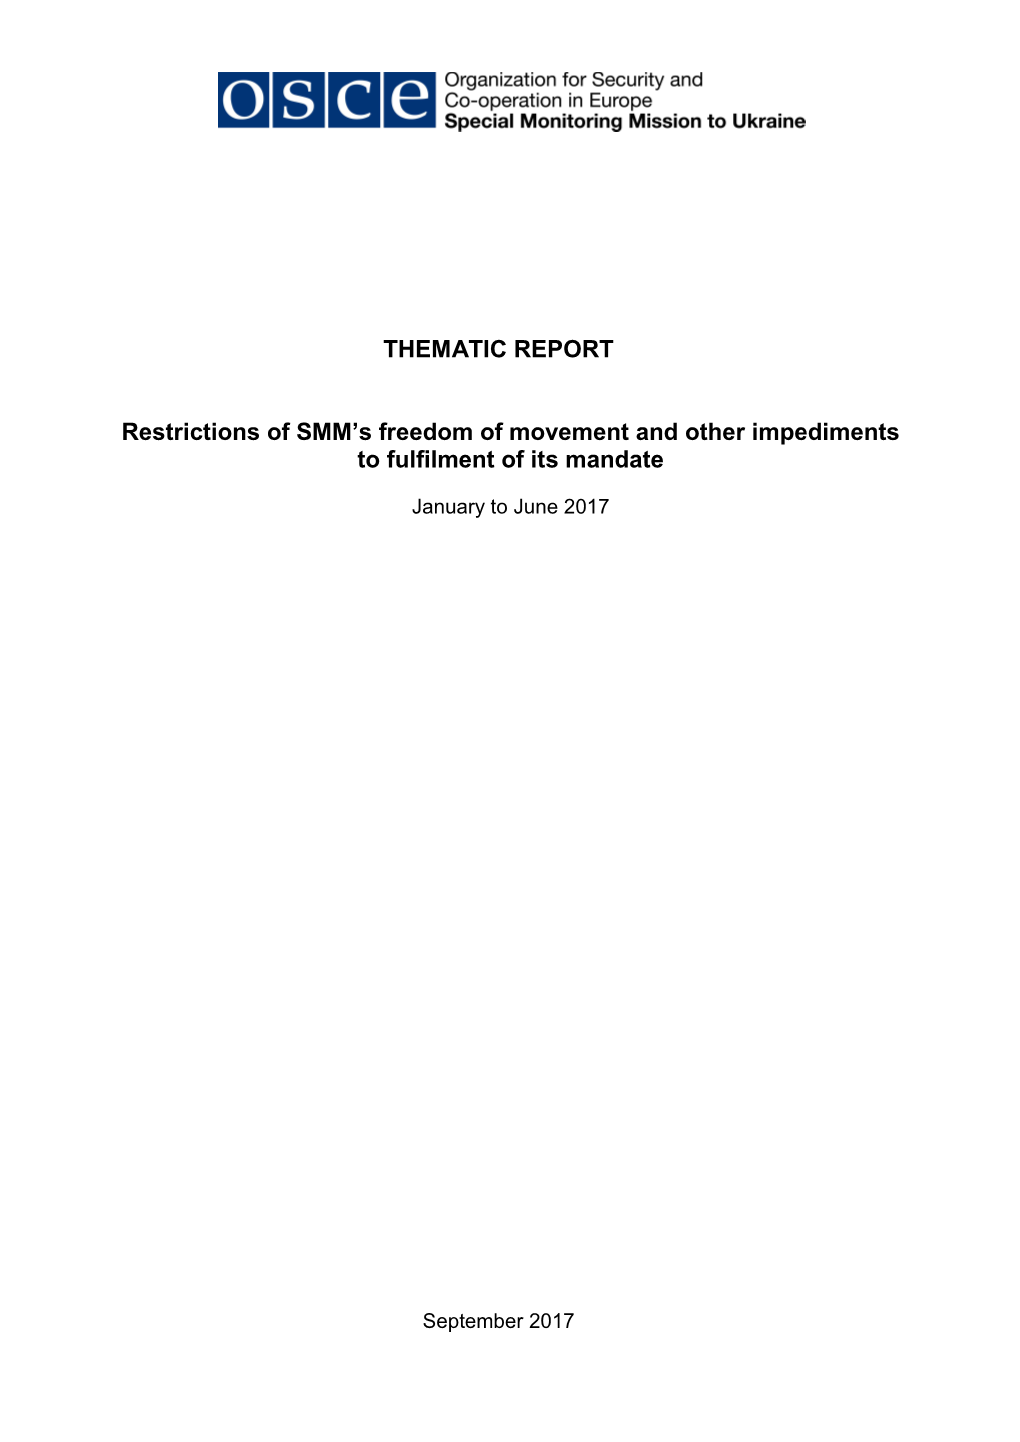 THEMATIC REPORT Restrictions of SMM's Freedom of Movement and Other Impediments to Fulfilment of Its Mandate